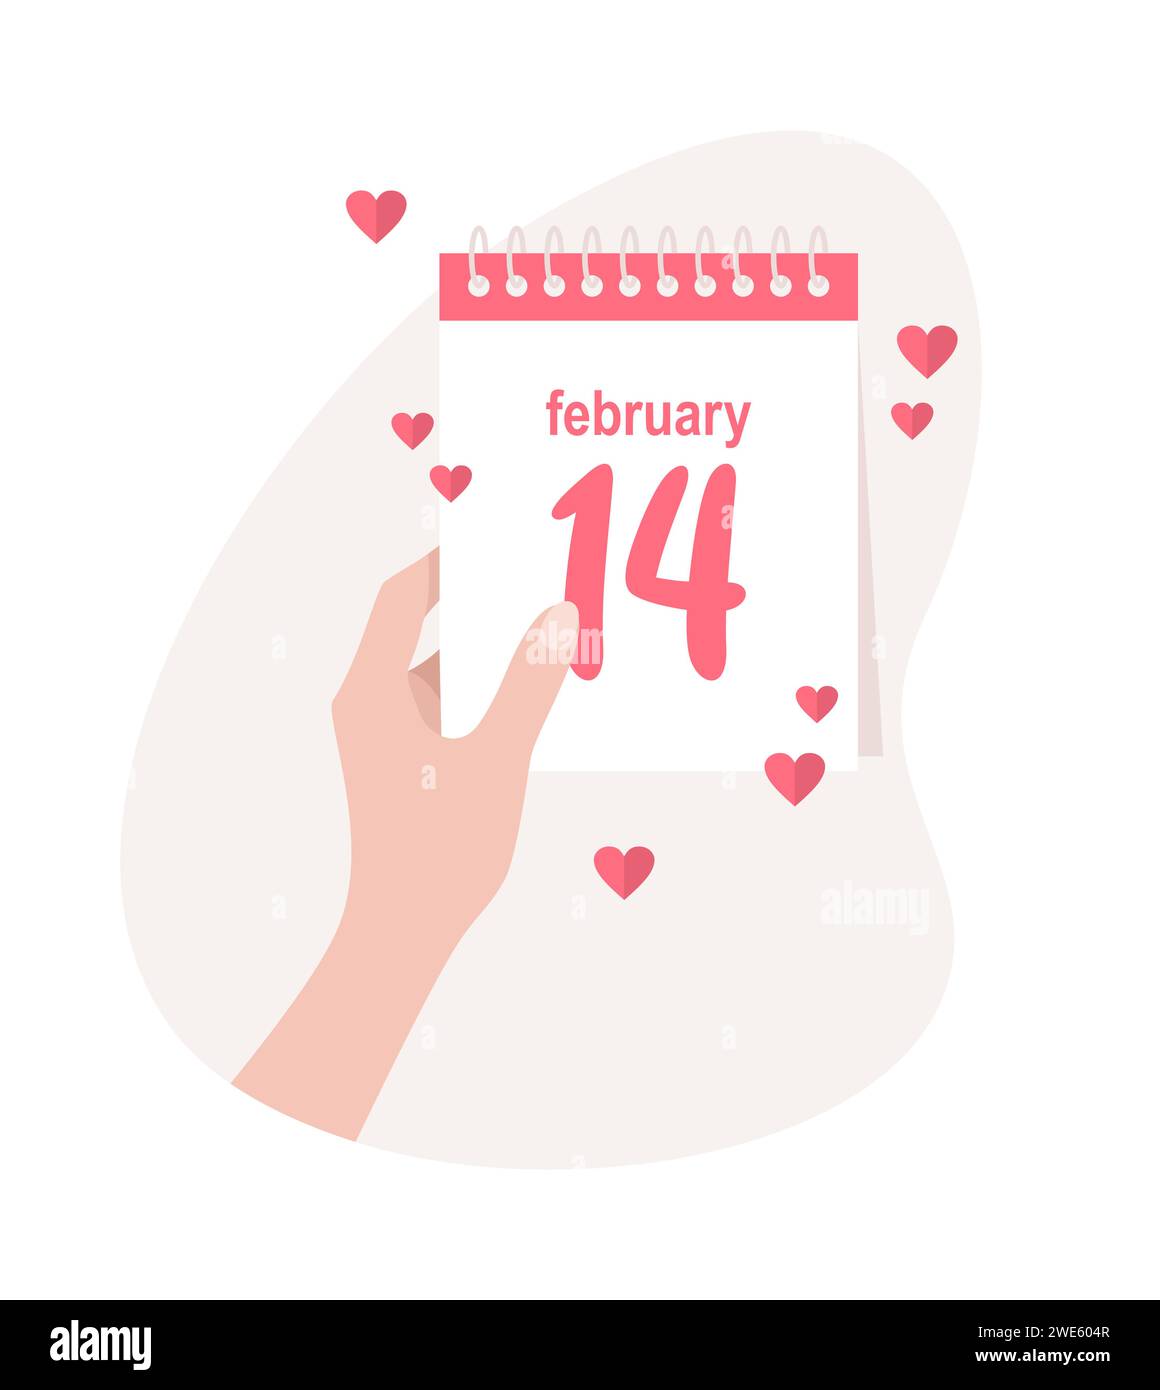 Hand Holding Daily Calendar With Date February 14 Valentines Day